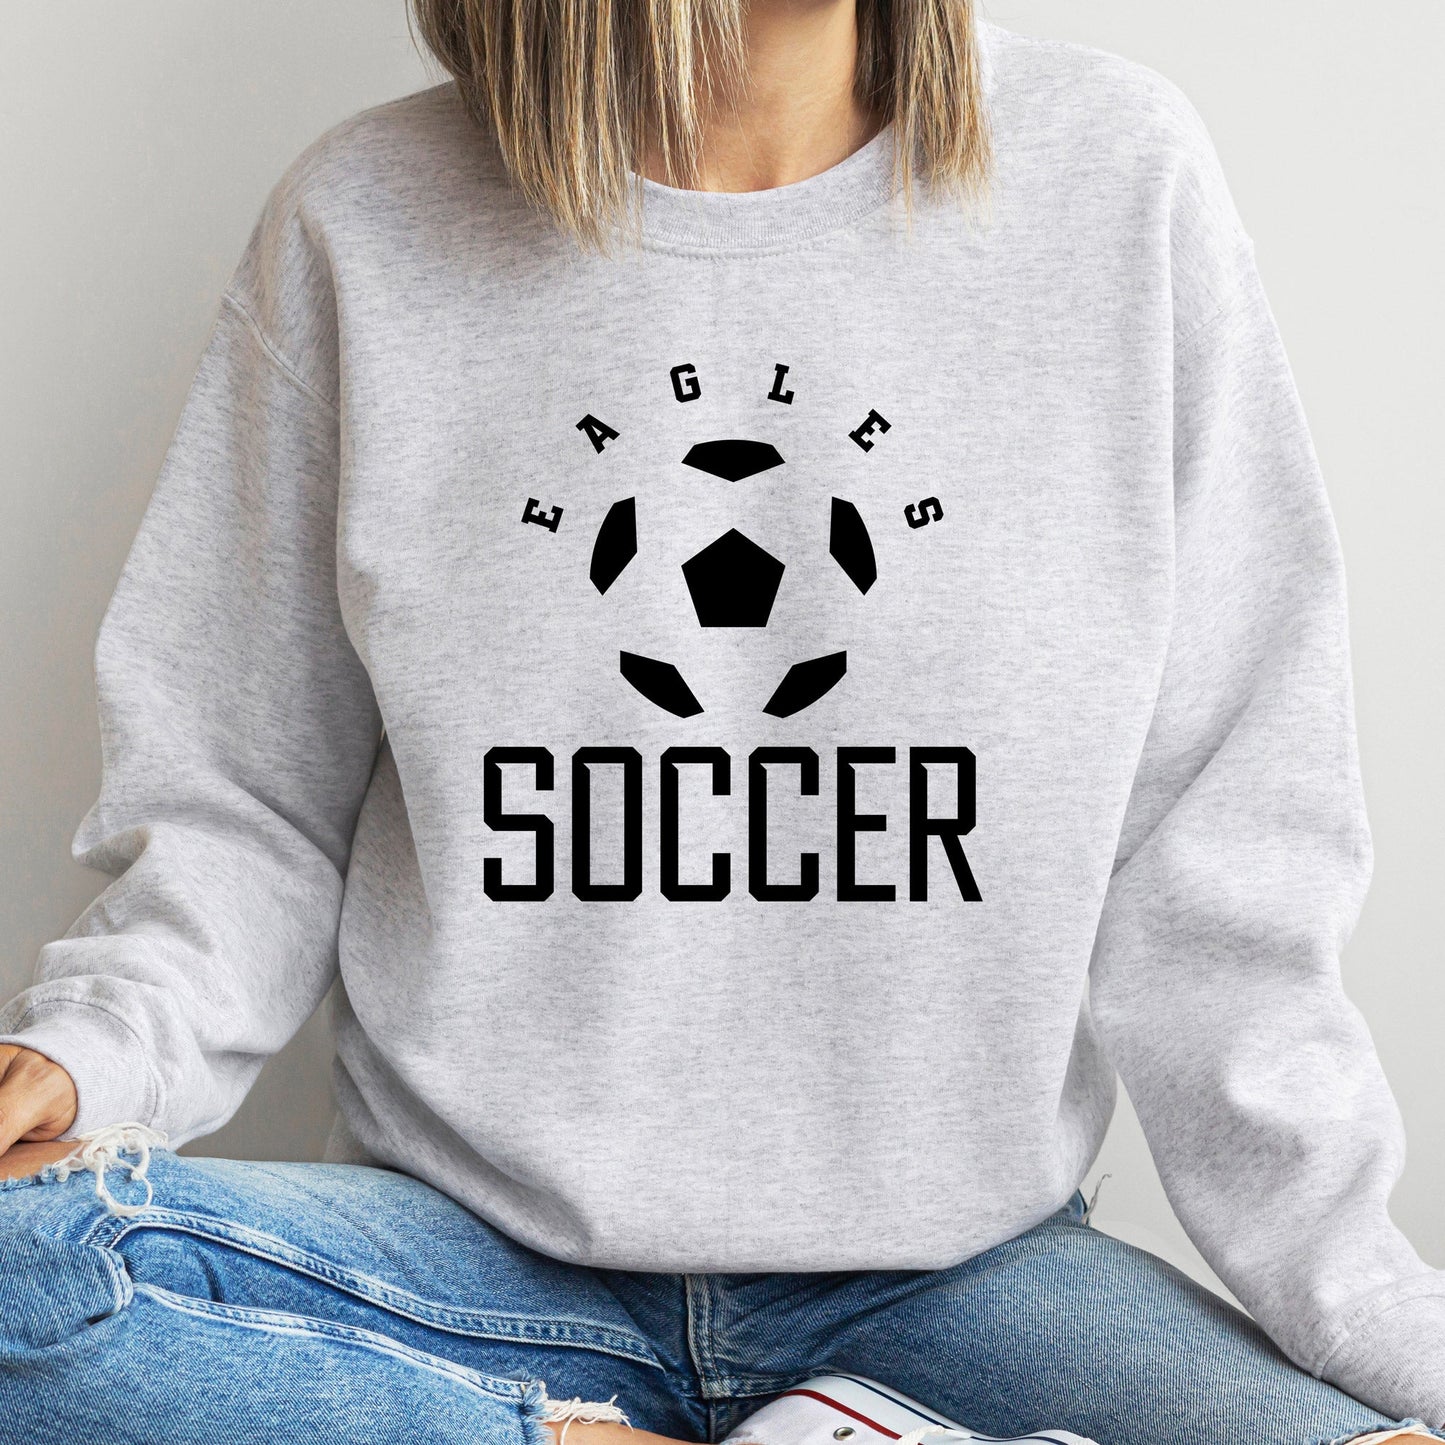 woman wearing a custom dtg printed sweatshirt featuring a soccer ball, the word soccer, and the mascot or team name. 